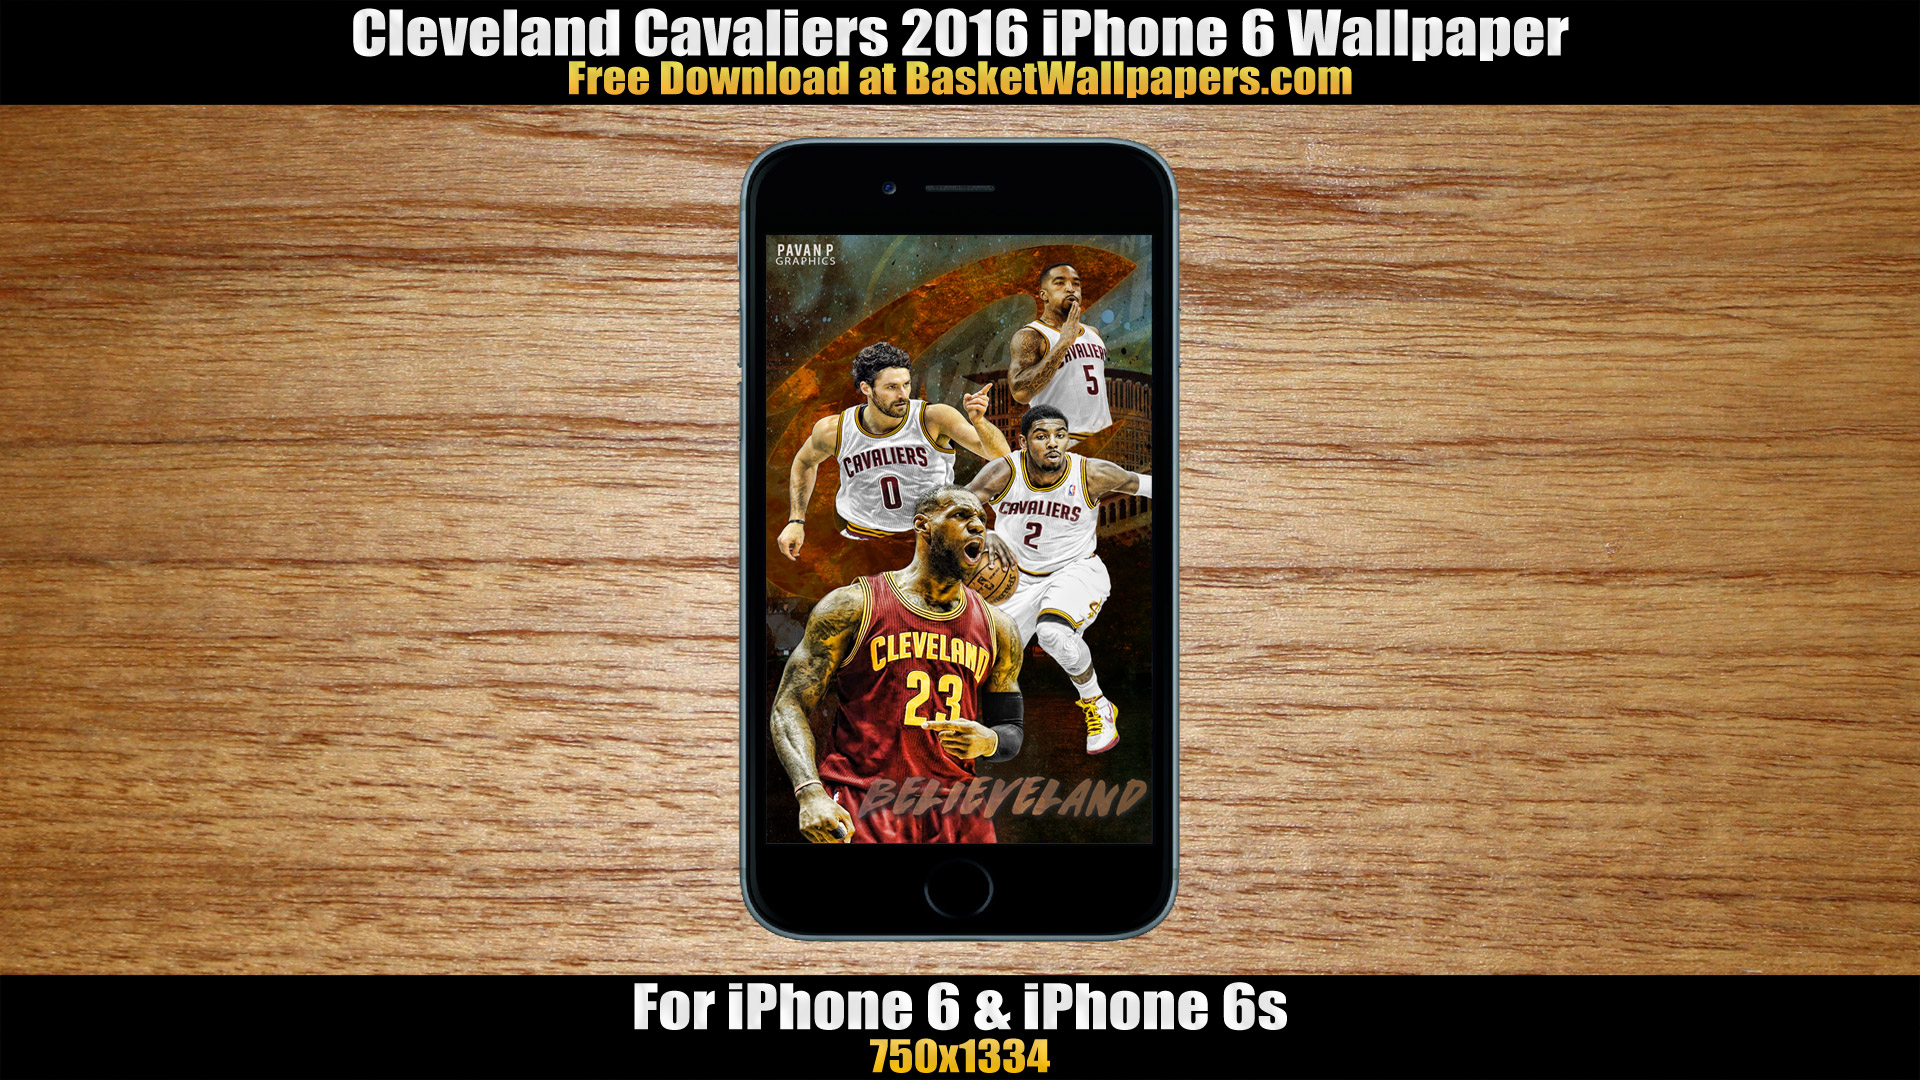 Cleveland Cavaliers 2016 iPhone 6 Wallpaper